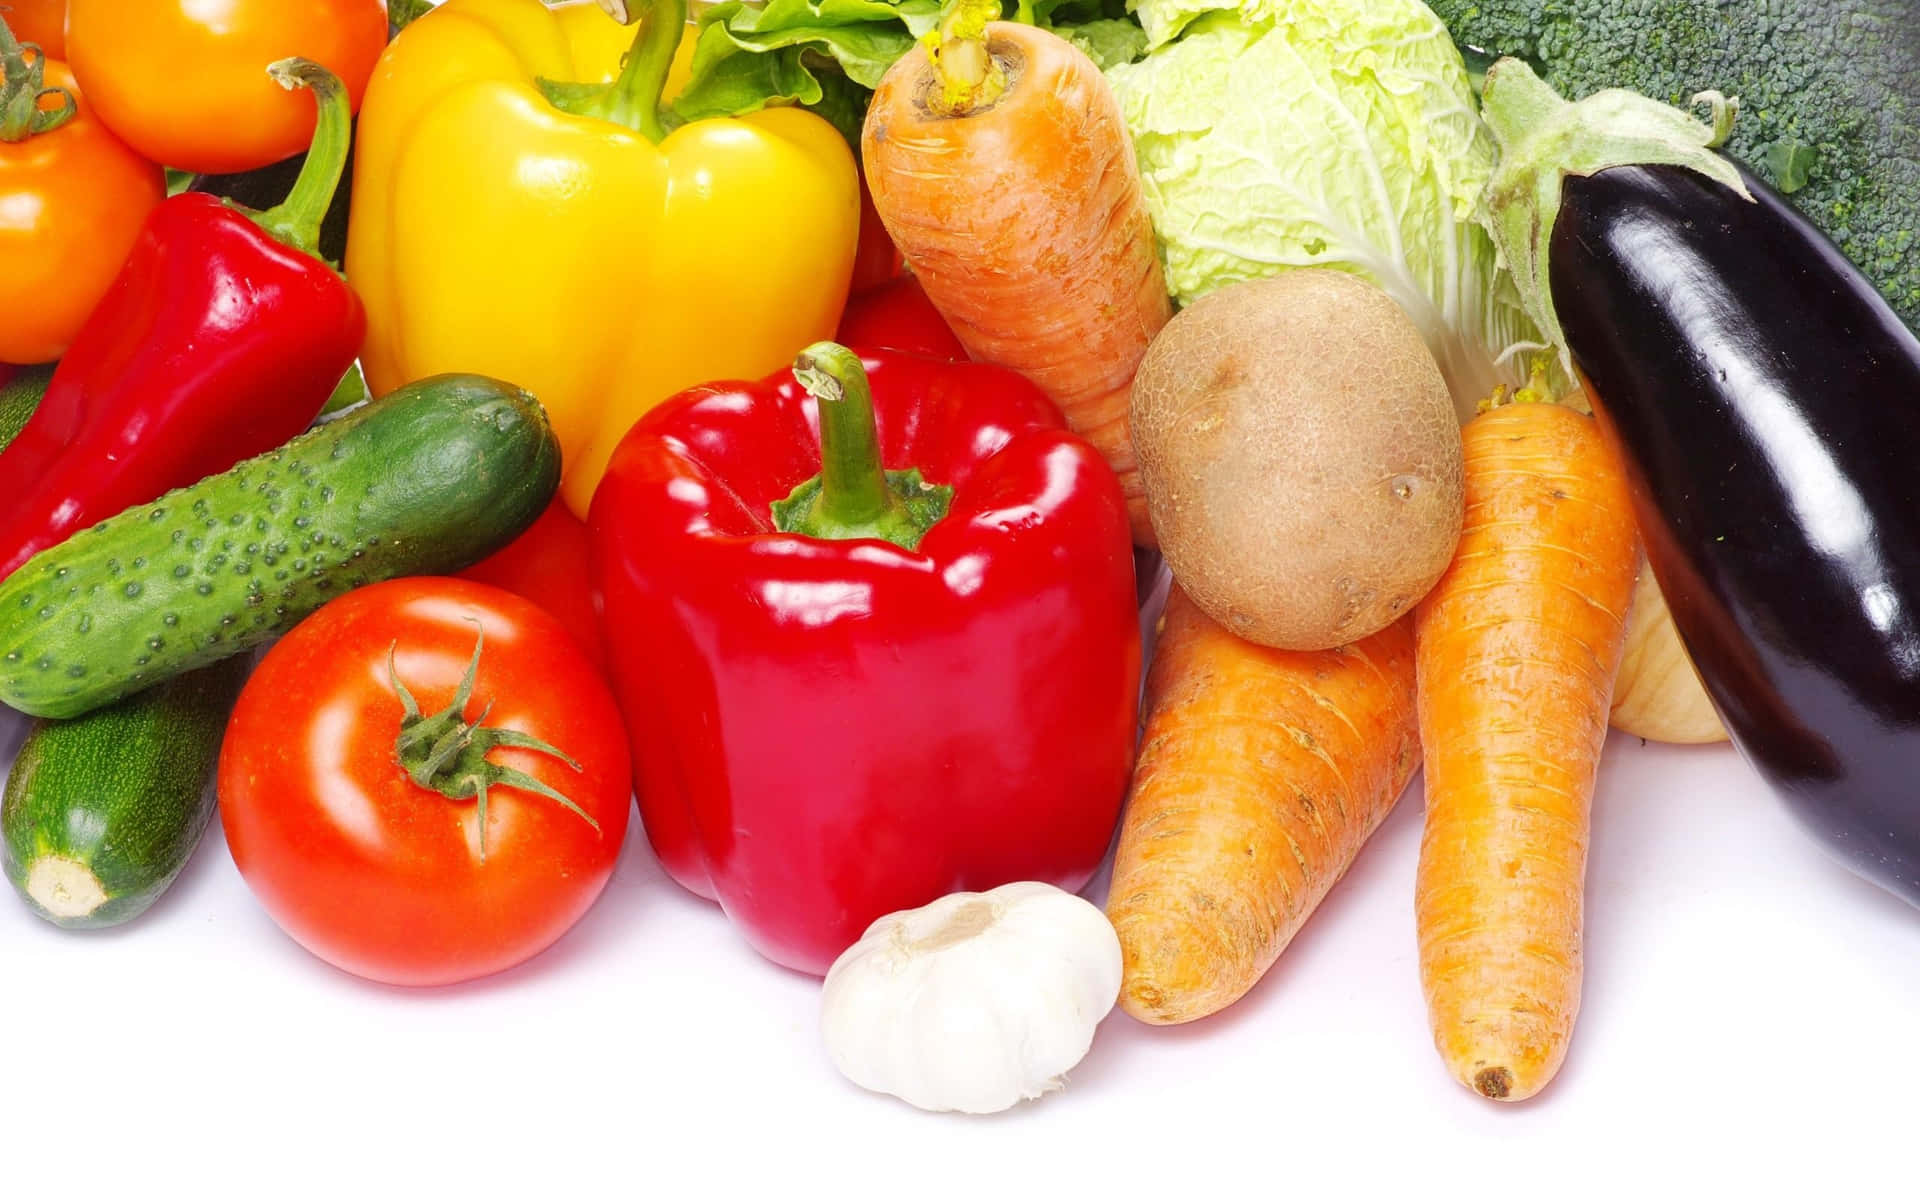 A Group Of Vegetables On A White Background